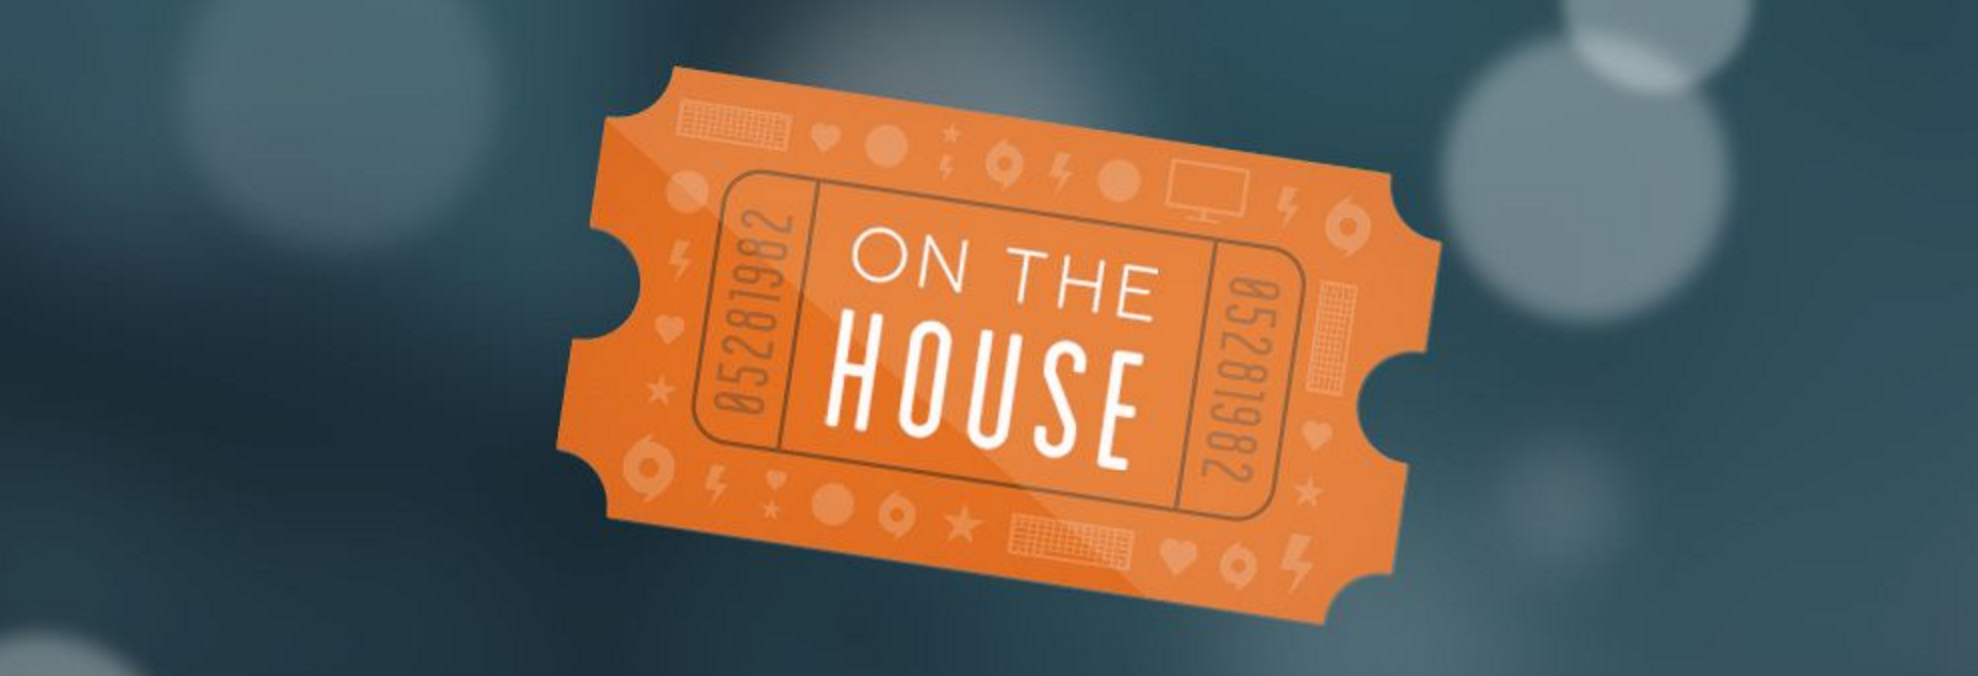 on-the-house